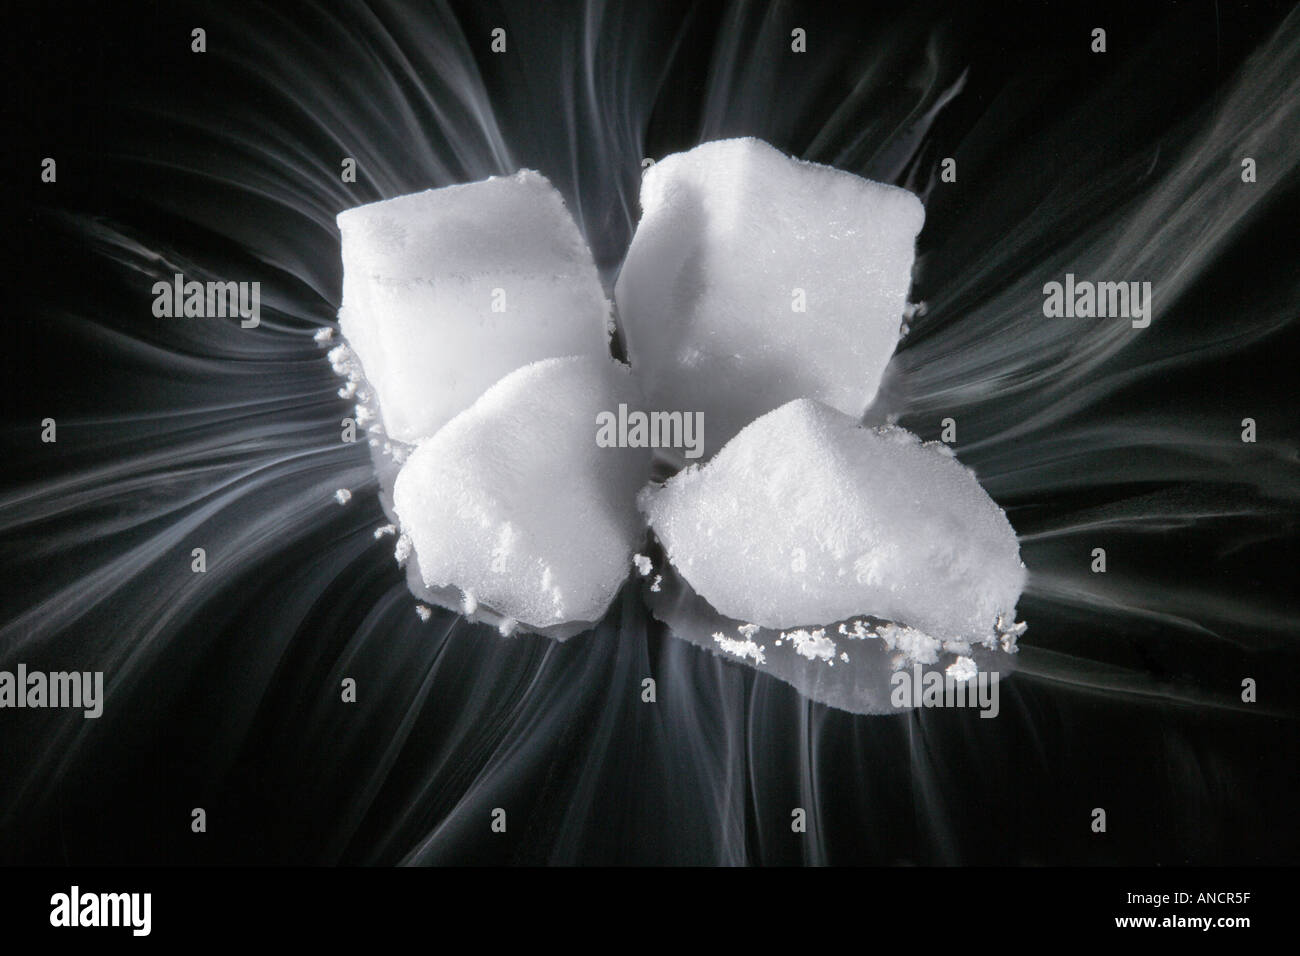 Dry Ice Frozen Carbon Dioxide Stock Photo